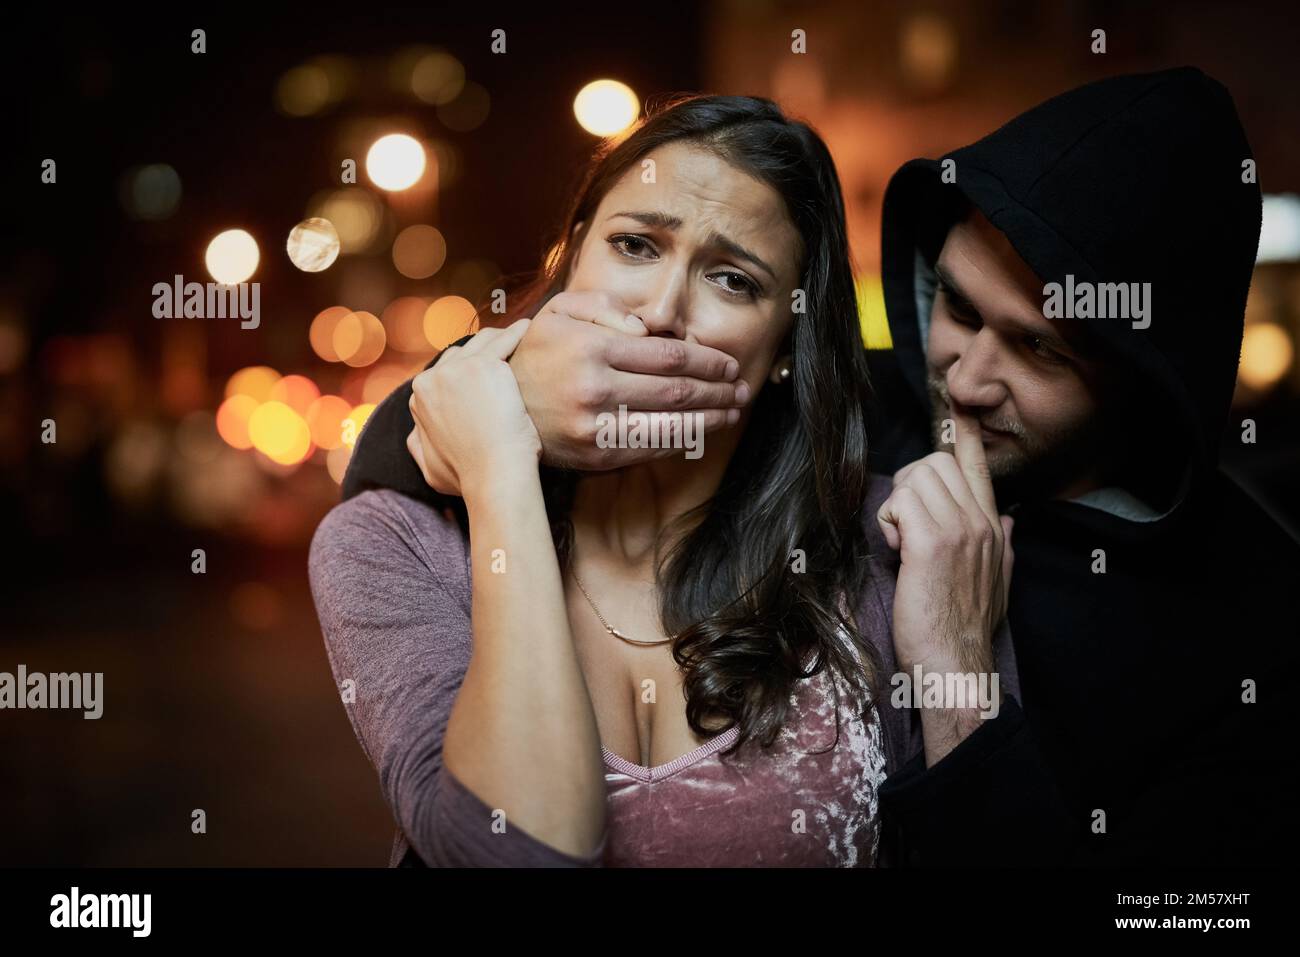 Shes frightened for her life. Portrait of a frightened young woman with her assailants hand over her mouth. Stock Photo